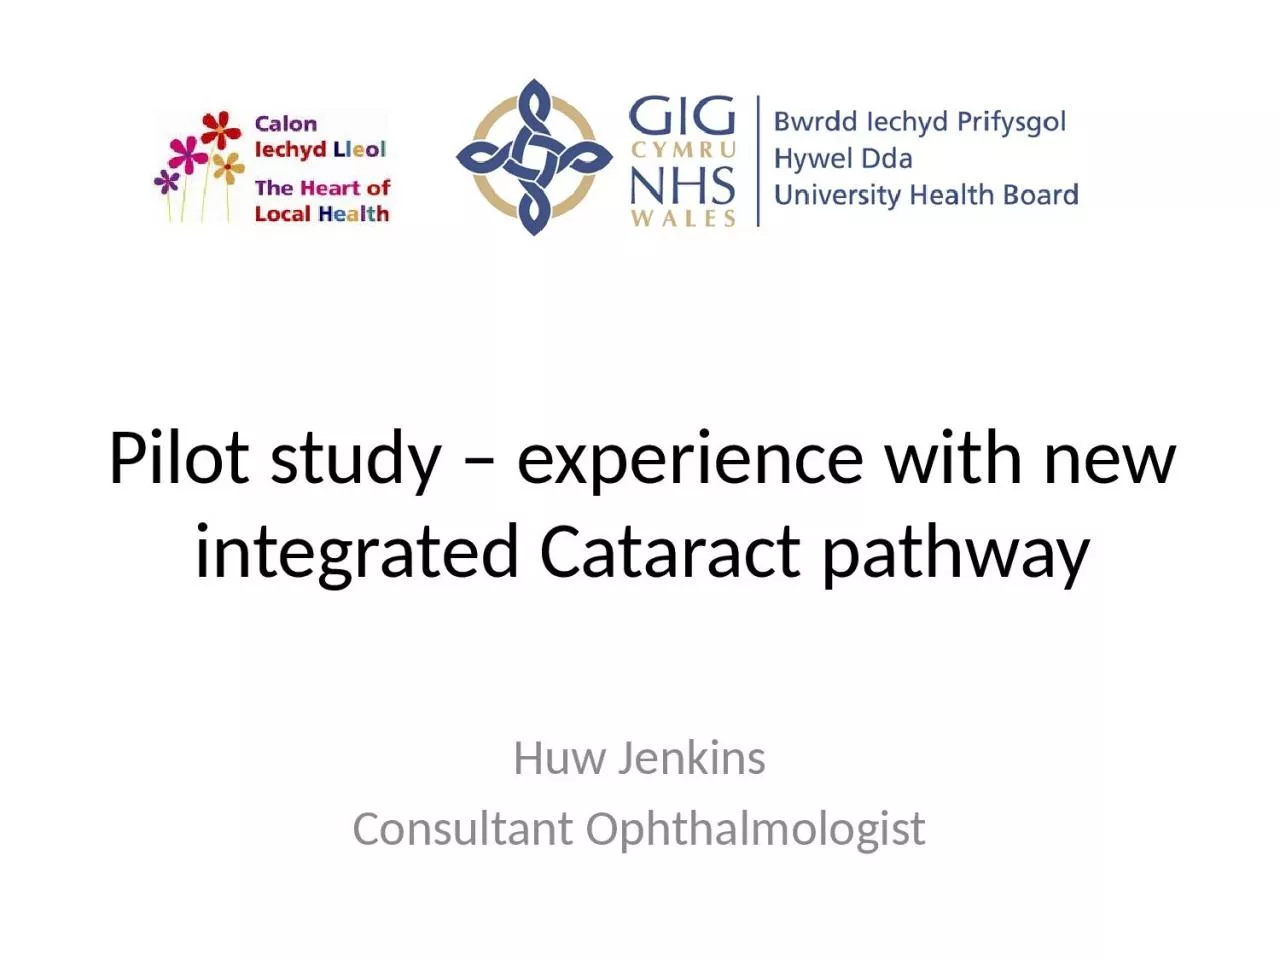 Pilot study – experience with new integrated Cataract pathway